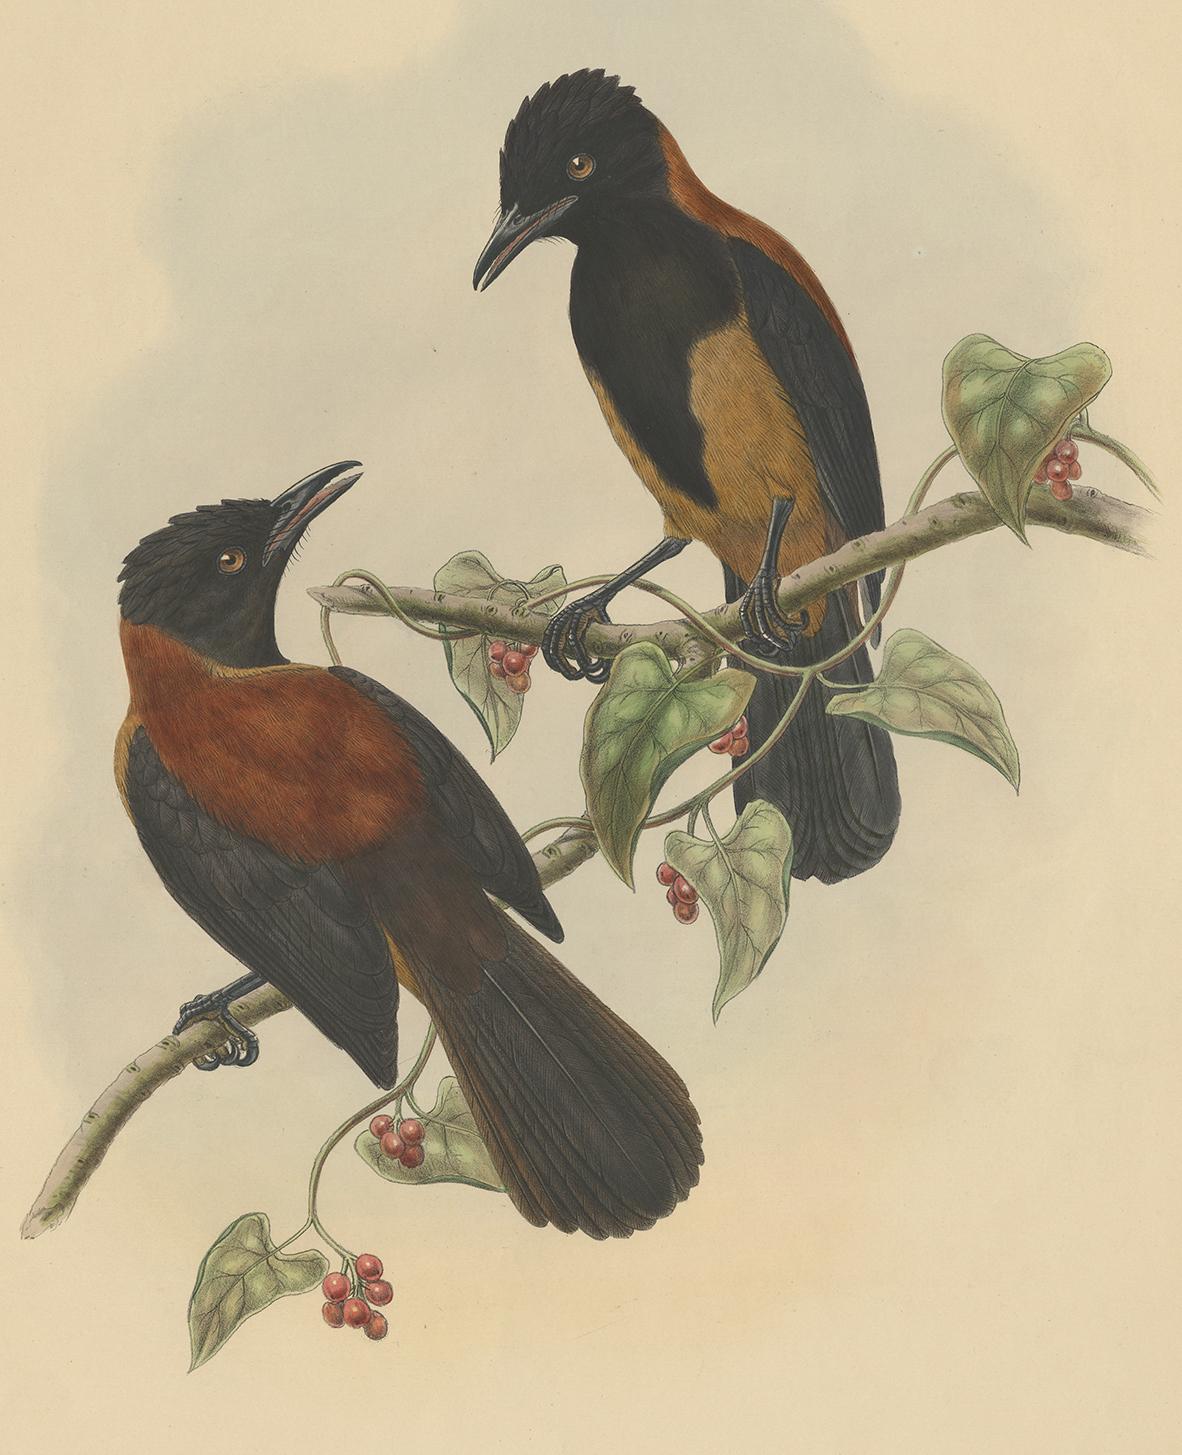 Antique print titled 'Rectes Aruensis'. This print originates from John Gould's Birds of New Guinea. Original text page included.